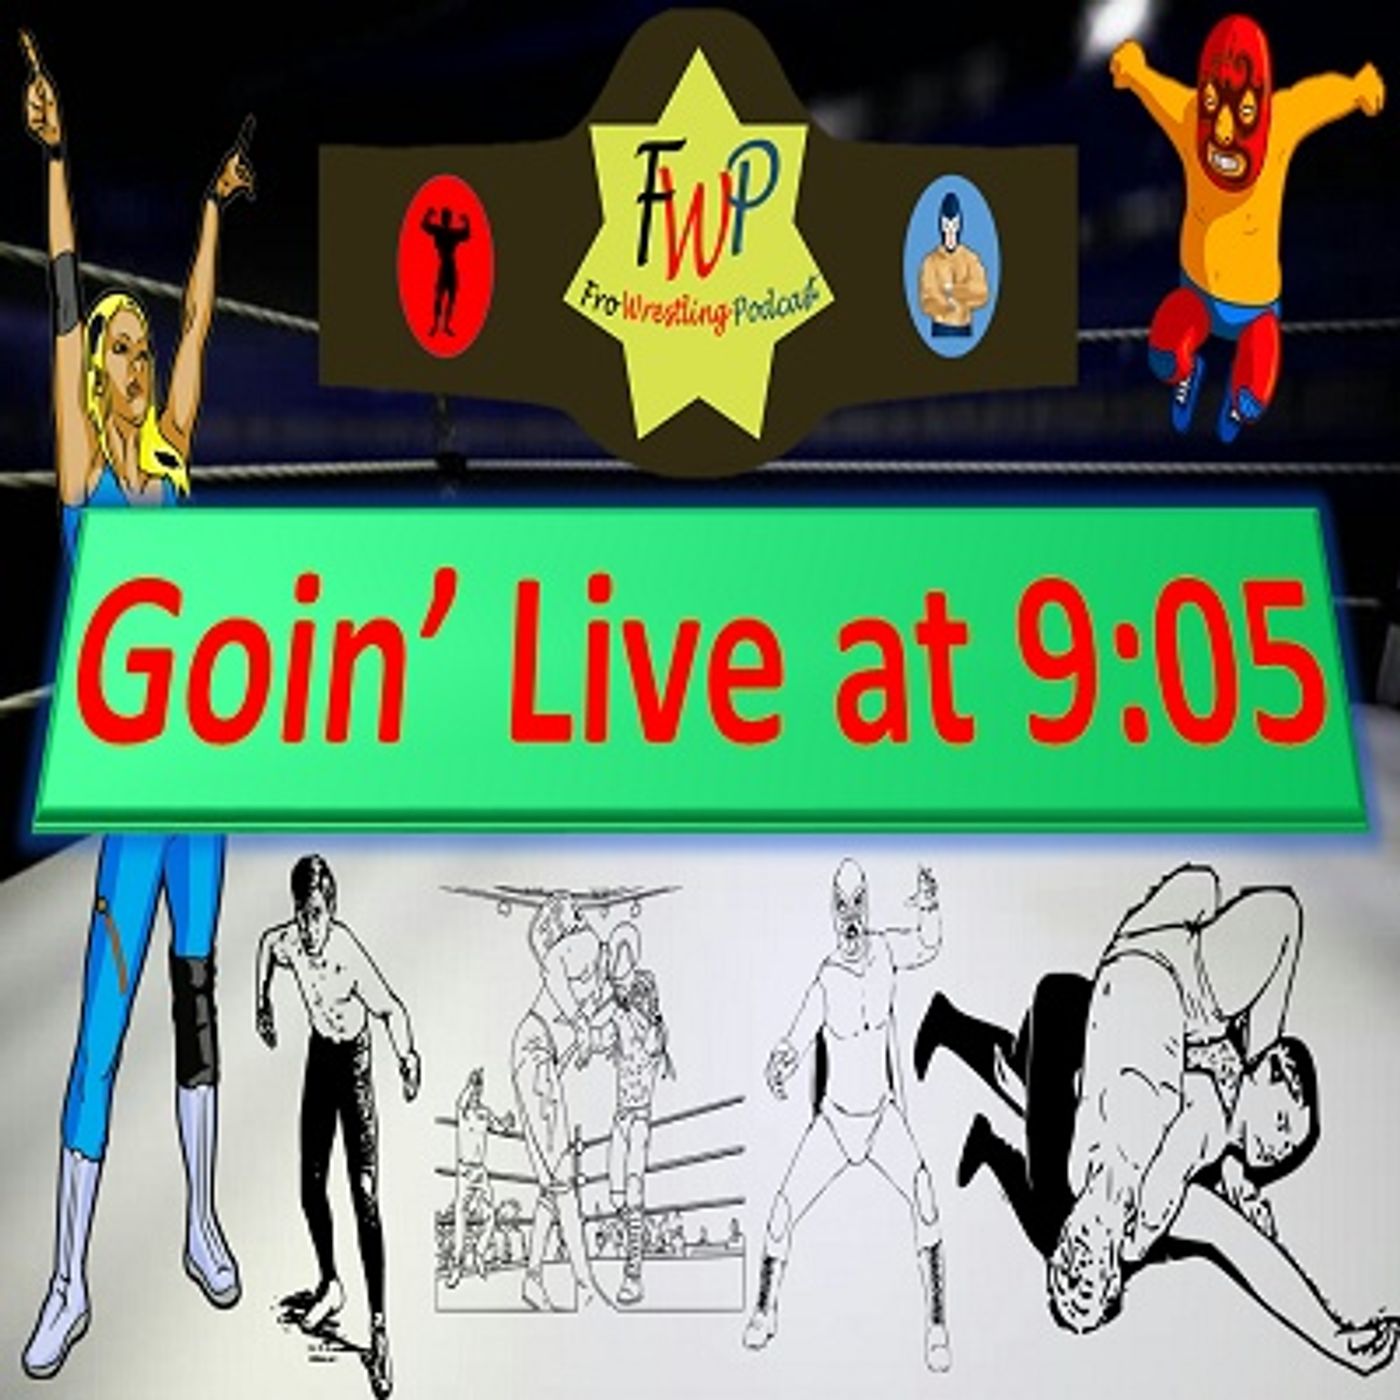 Fro Wrestling Podcast - Goin Live at 9:05